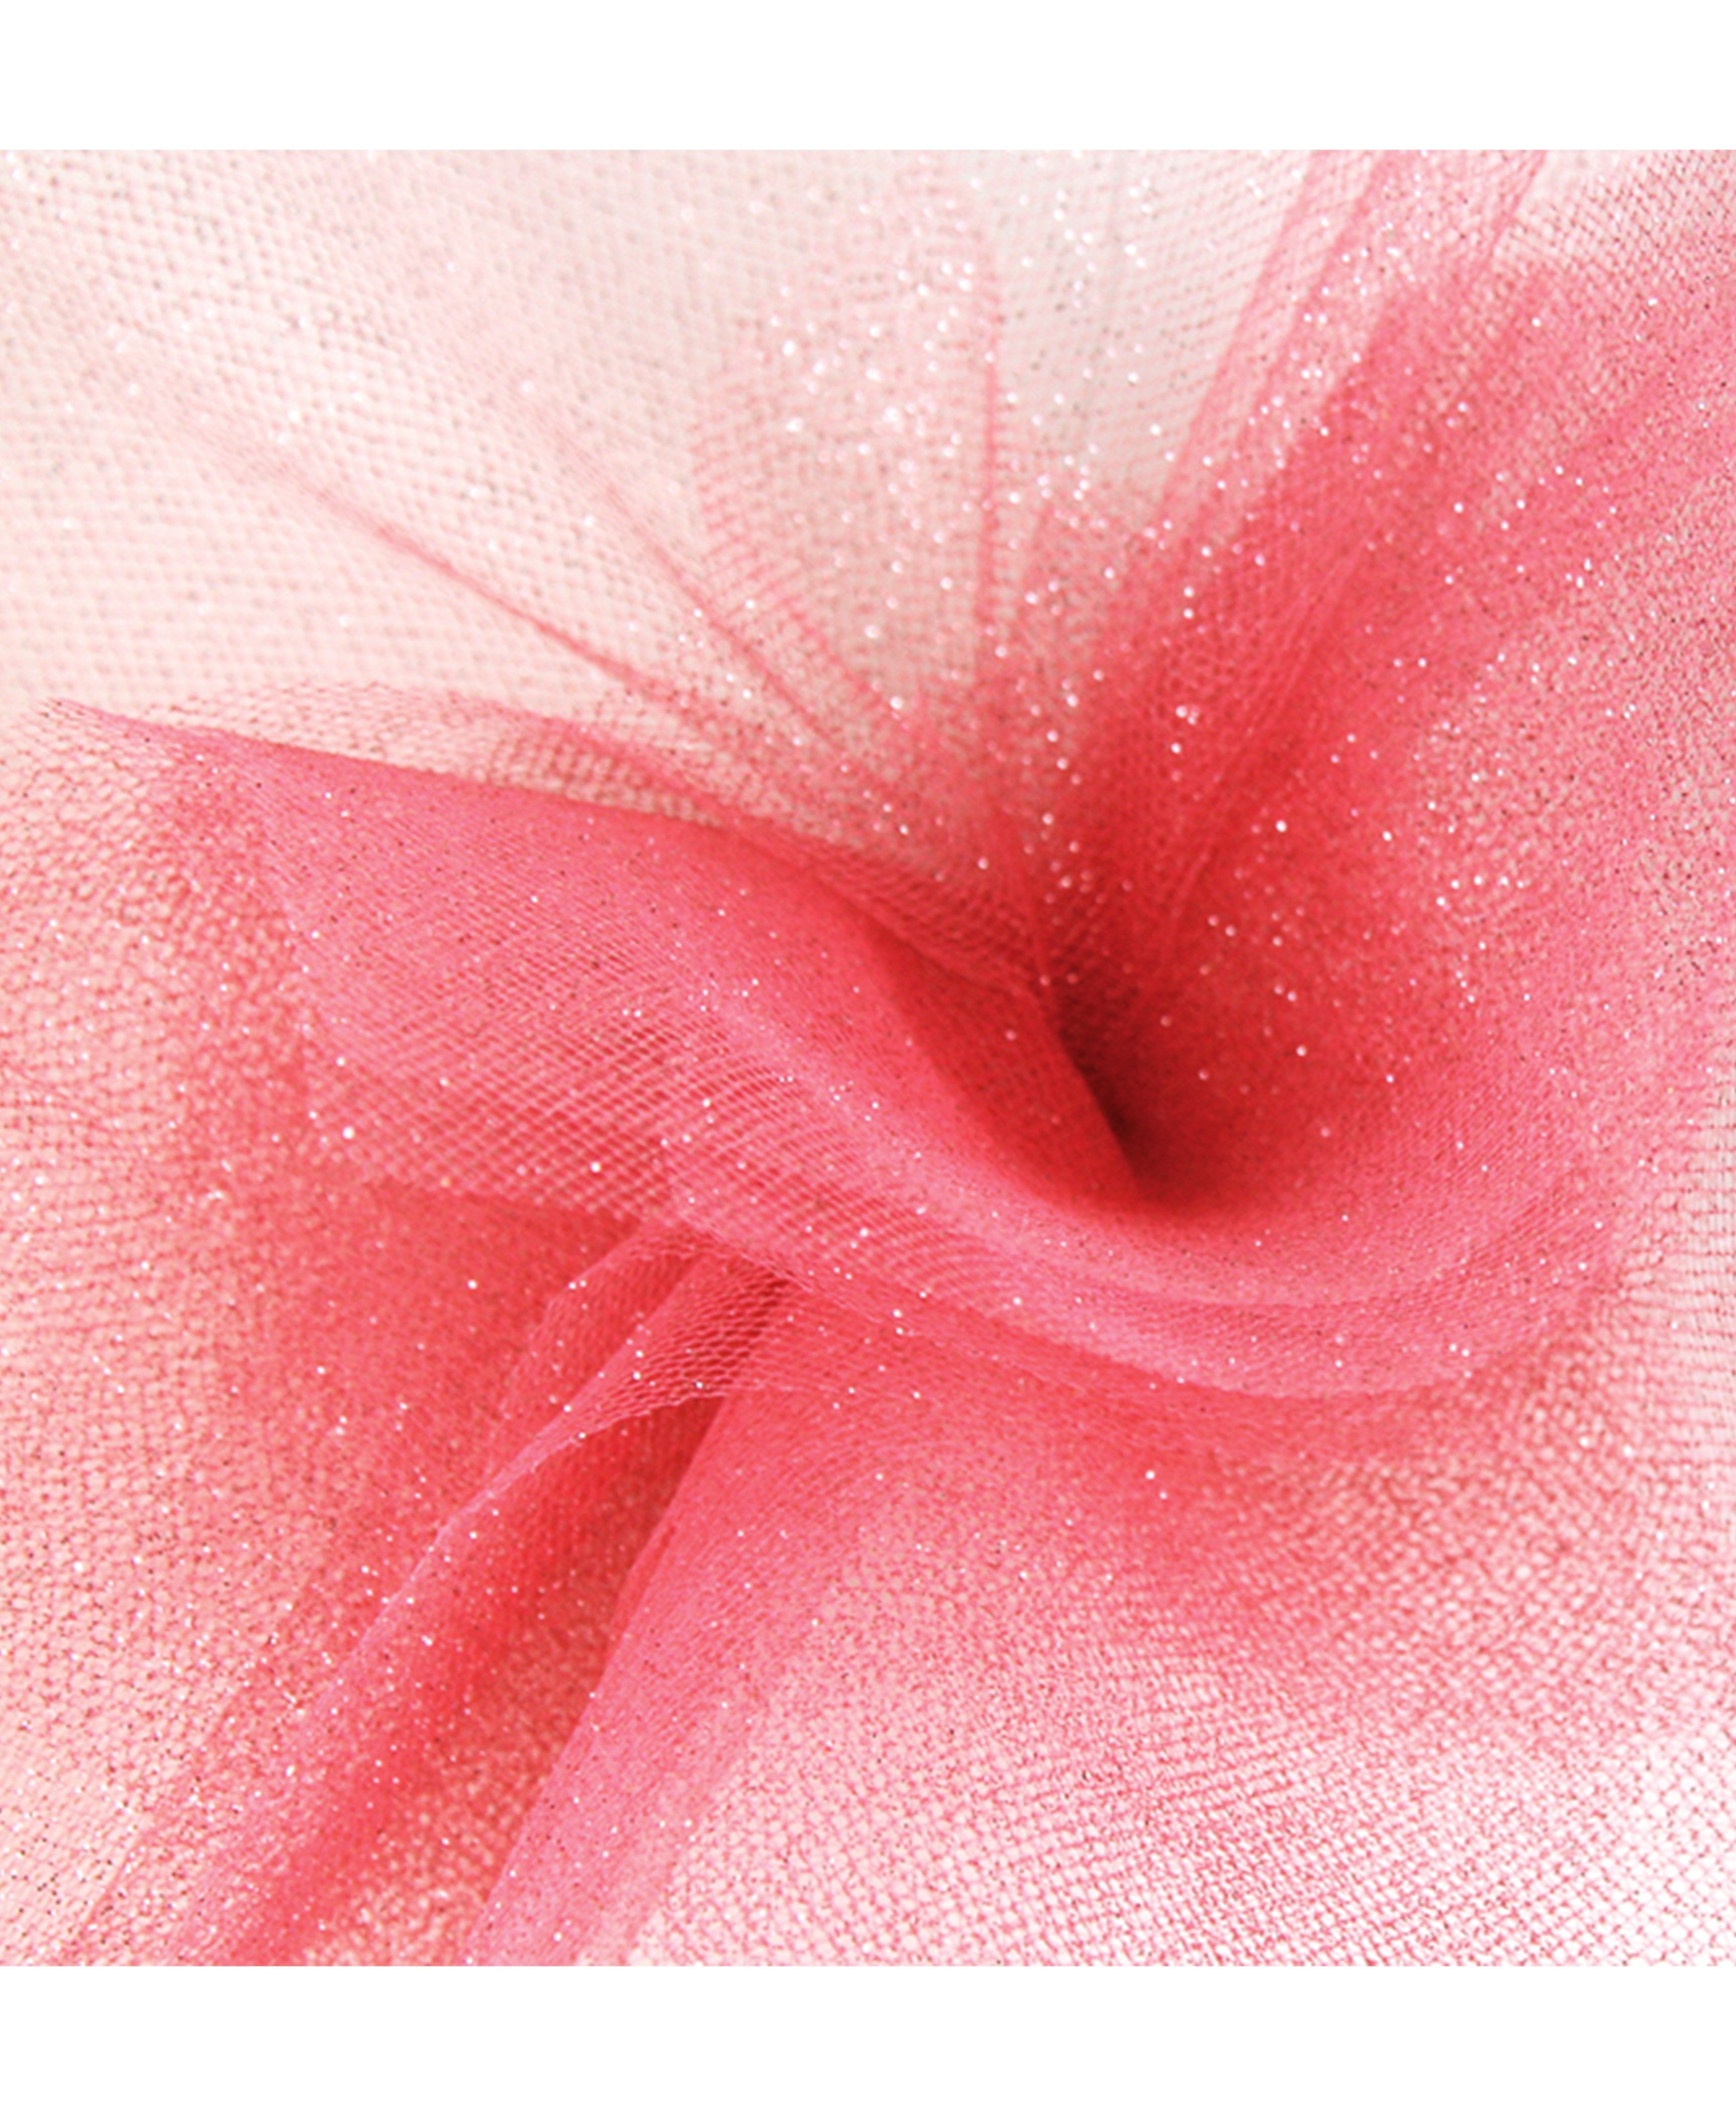 New Pink Tulle Ribbon - Tulle Ribbon - Tulle